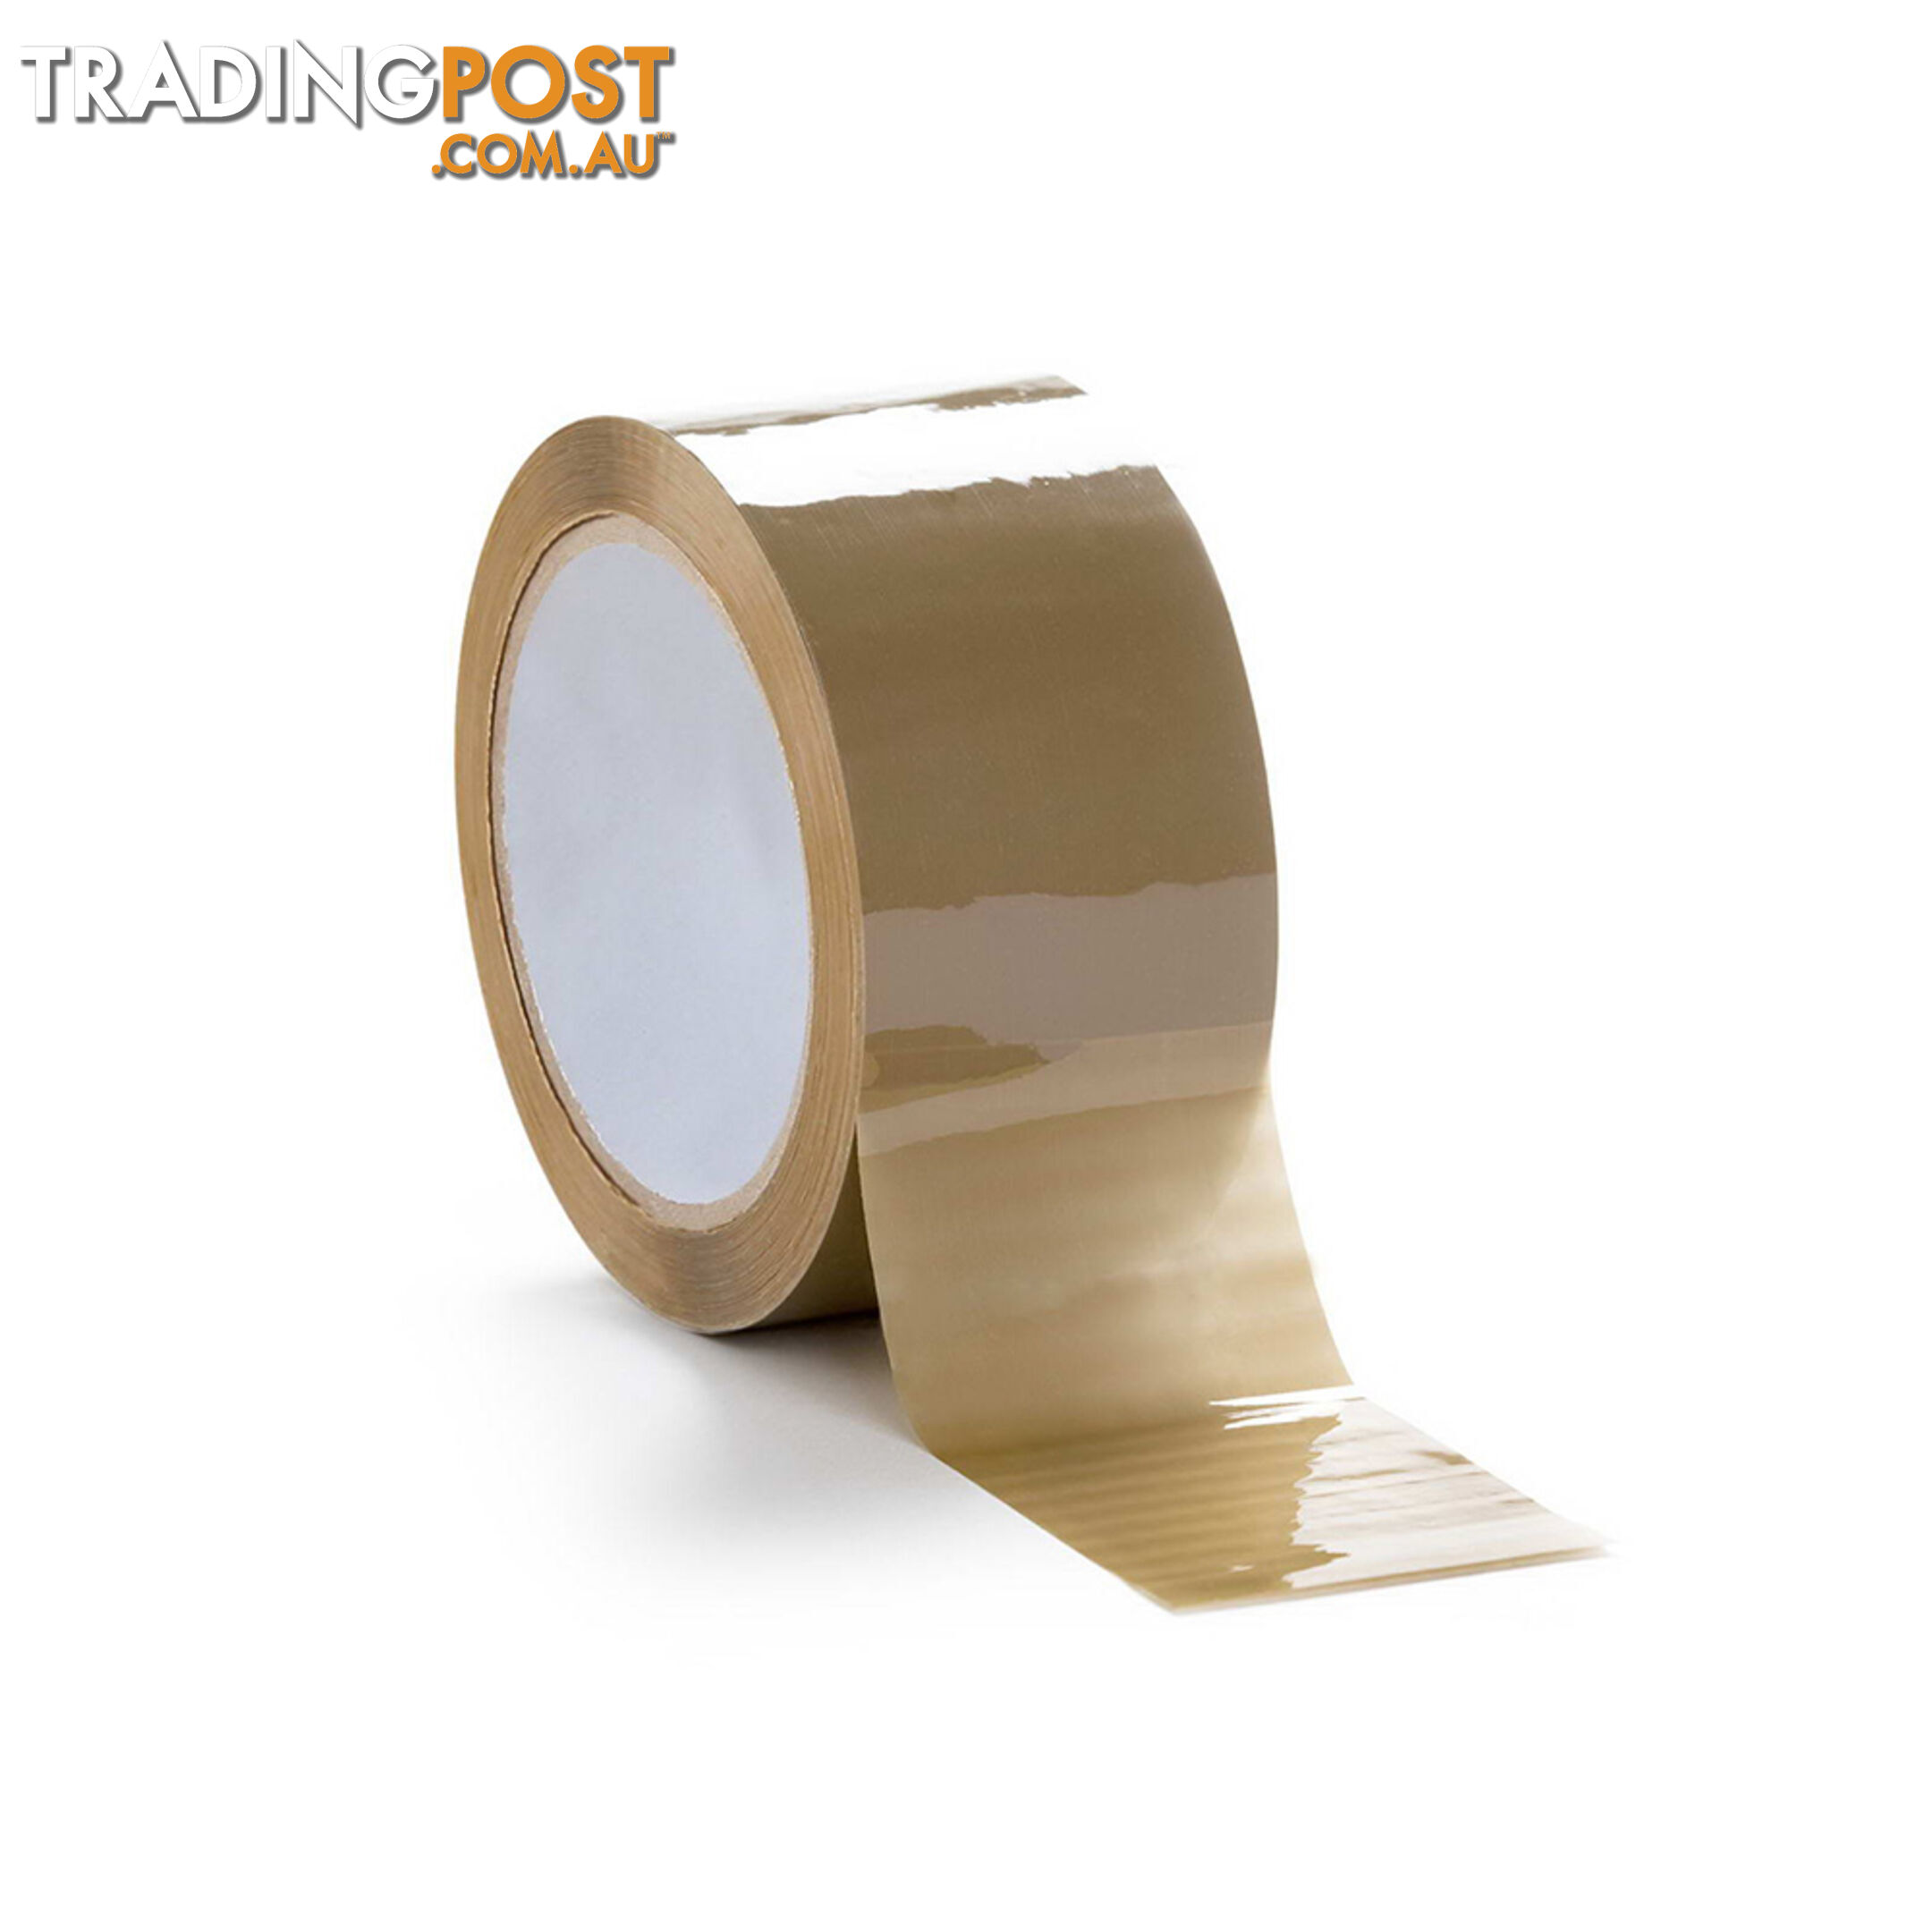 36 Rolls Packing Tape 48mm x 75m Shipping Box Carton Packaging Browntape